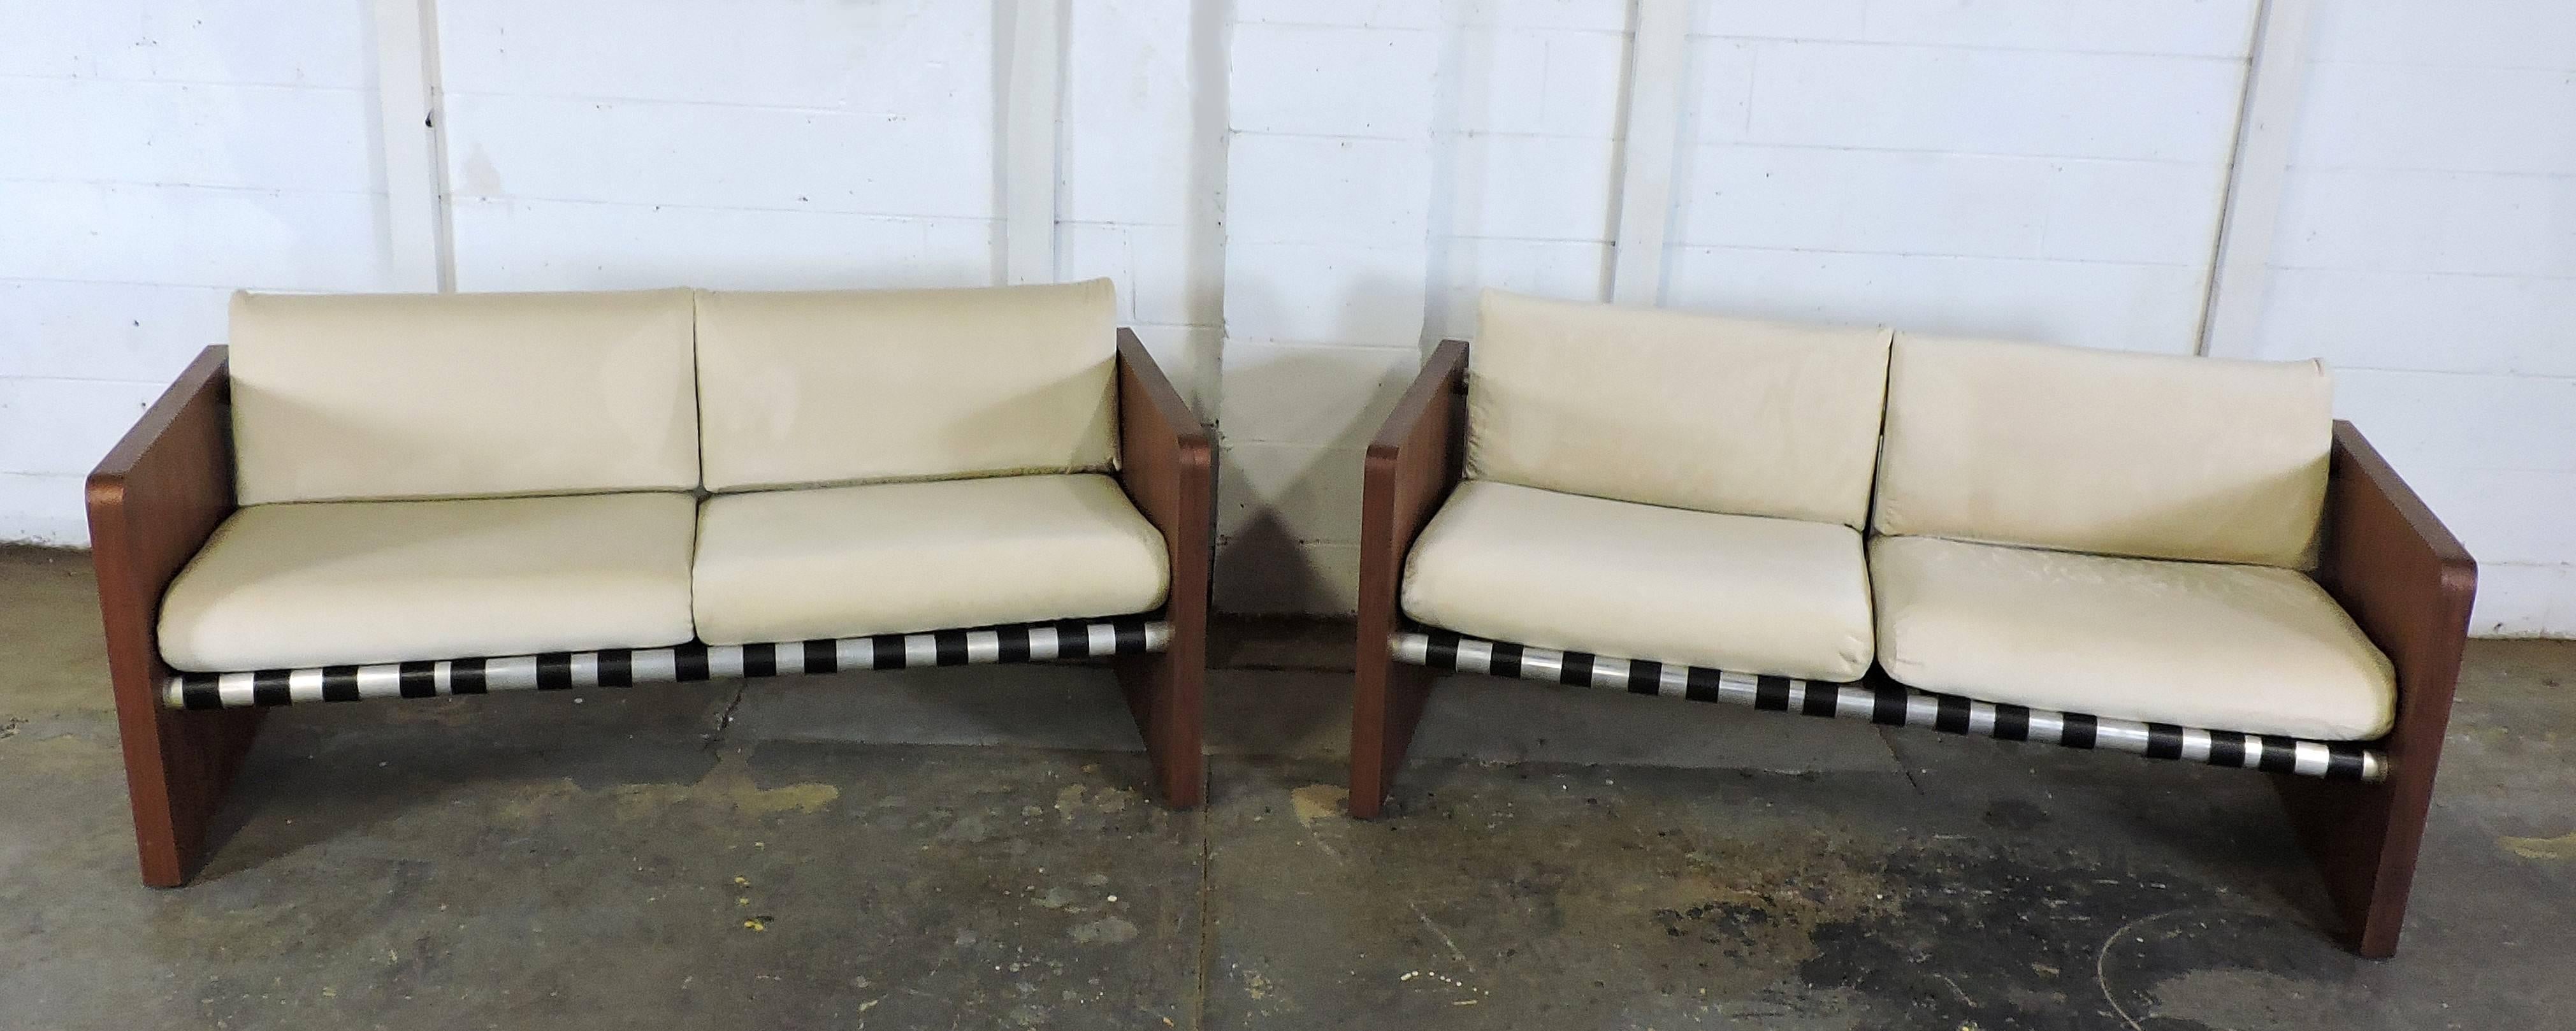 Pair of Mid-Century Modern Walnut Sling Sofas by Founders 4